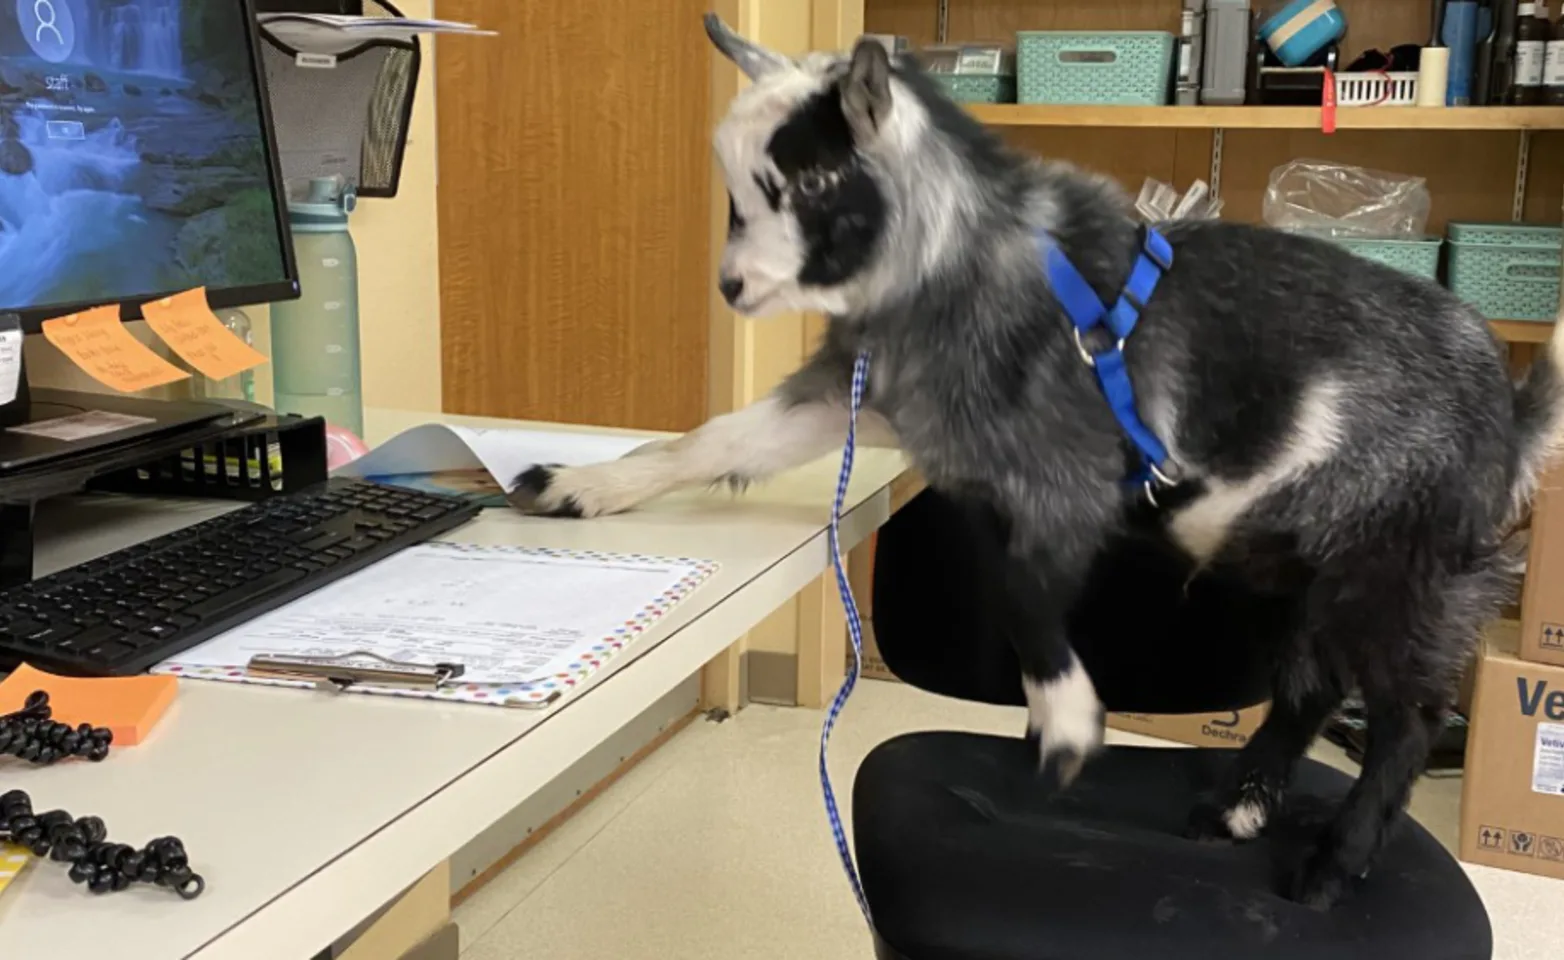 Gray and white goat in a chair at a computer desk